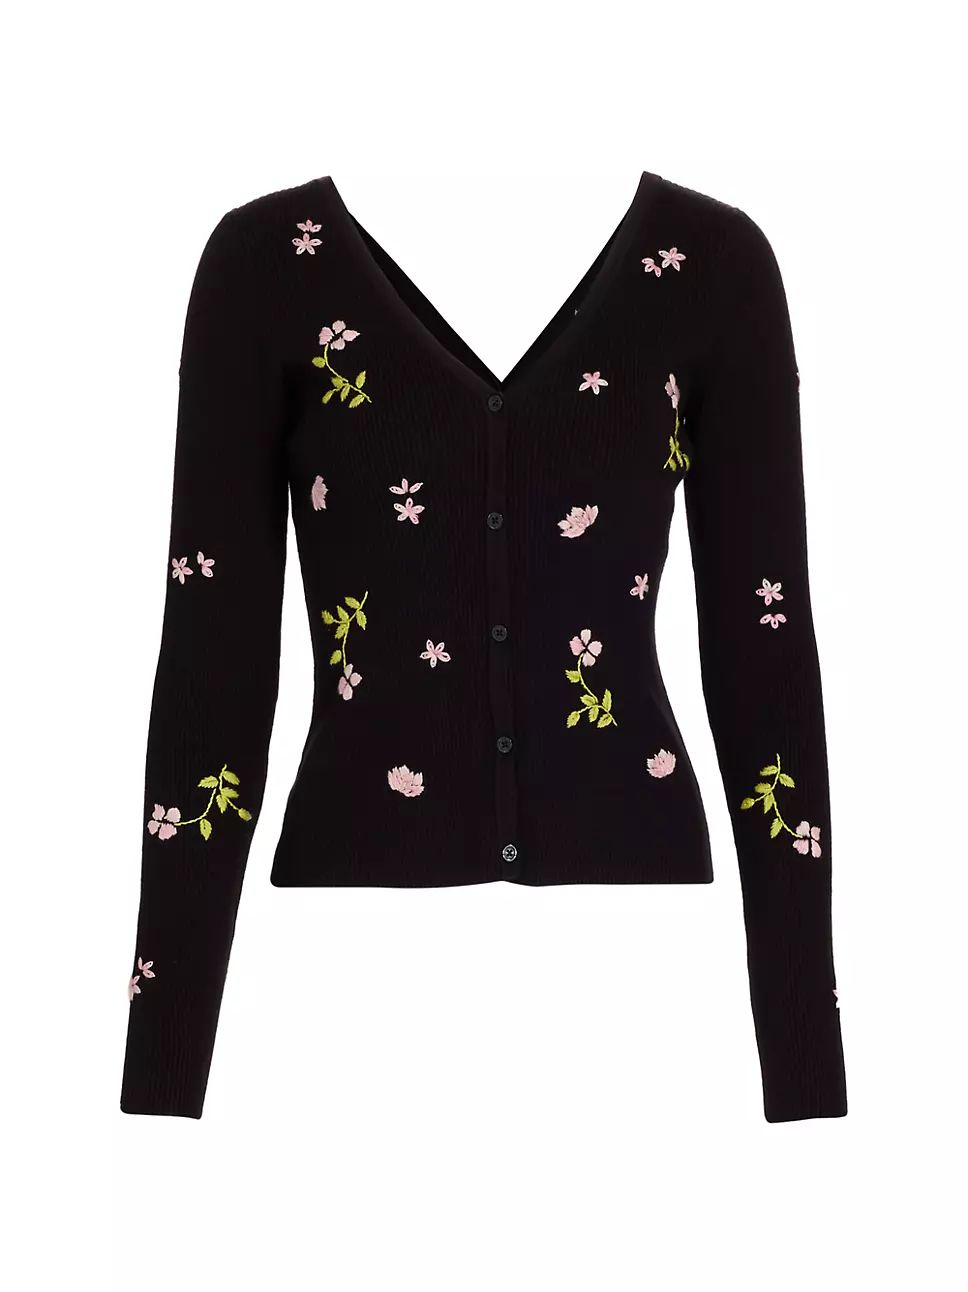 Captivating Embroidered Cardigan | Saks Fifth Avenue